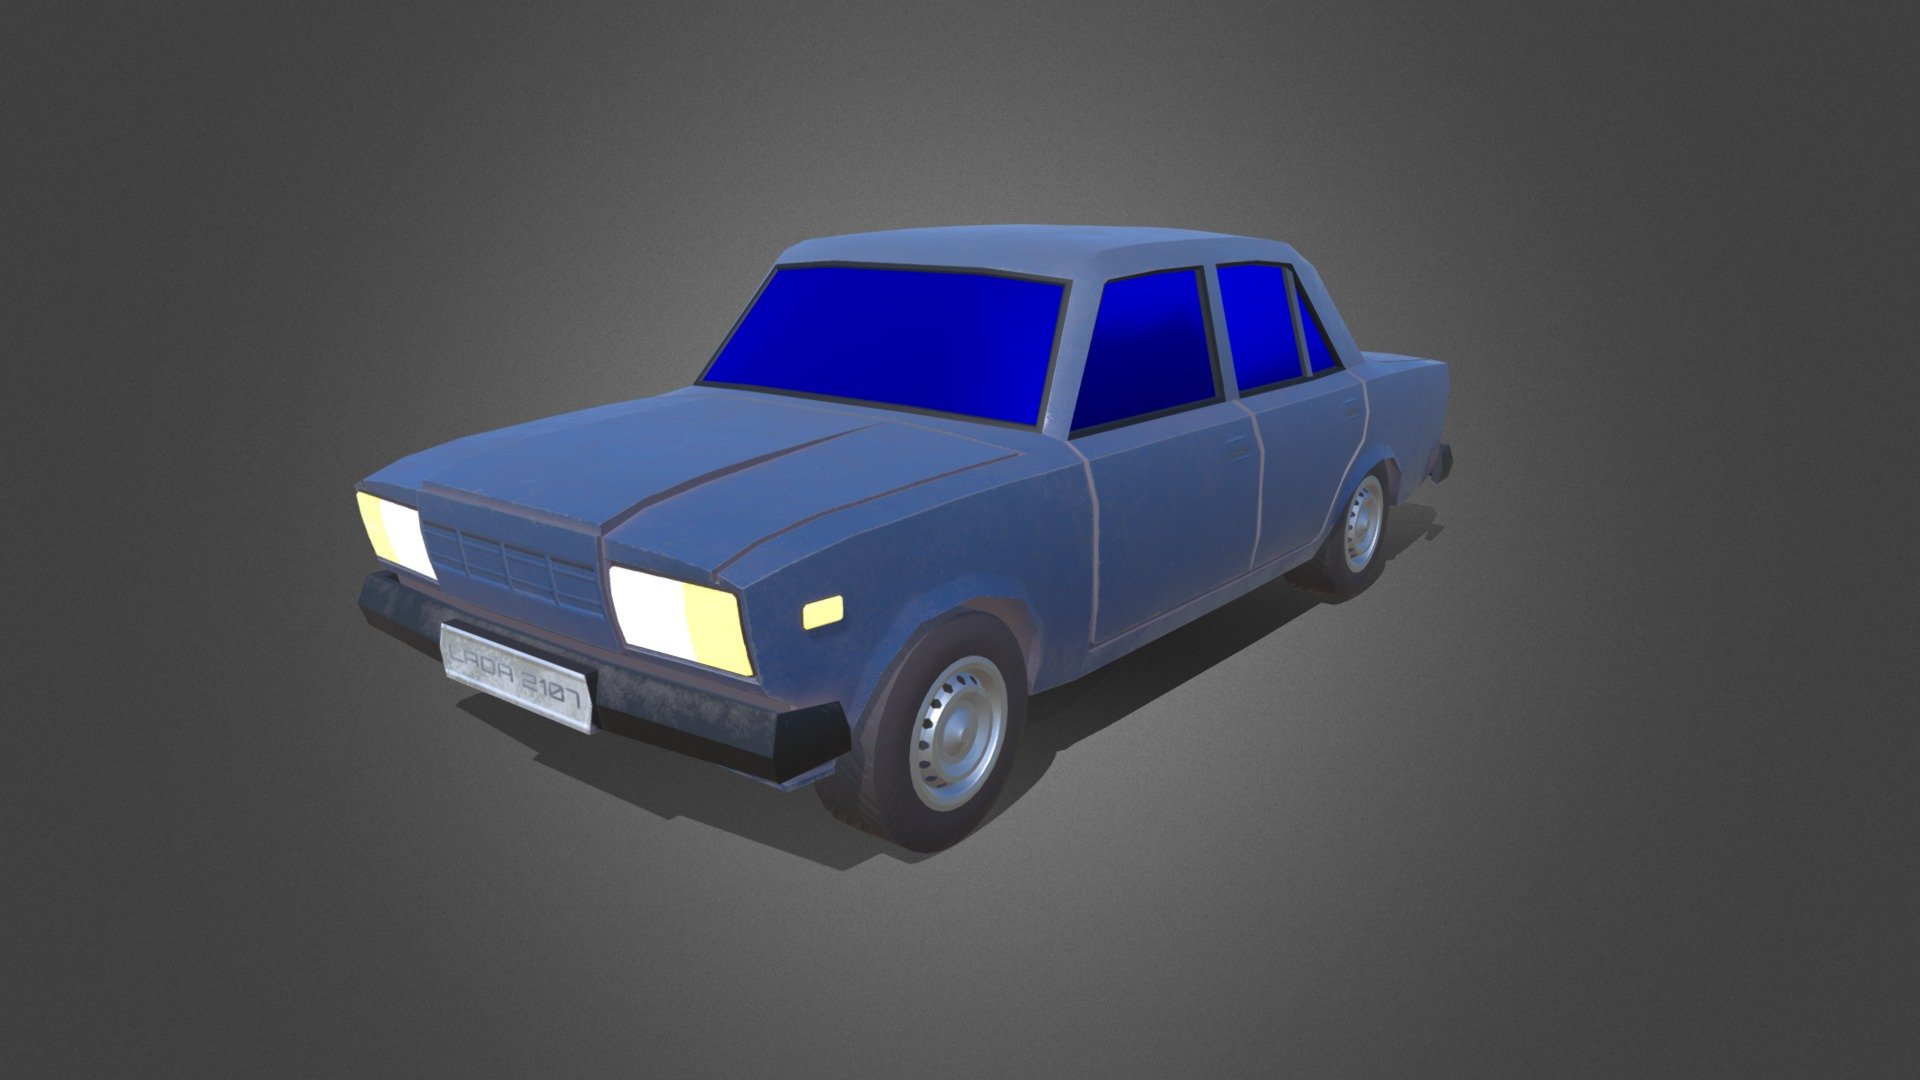 Soviet and Russian rear-wheel drive car of the II group of small class, with a sedan type body.

When creating used: Blender + Substance painter 3d model